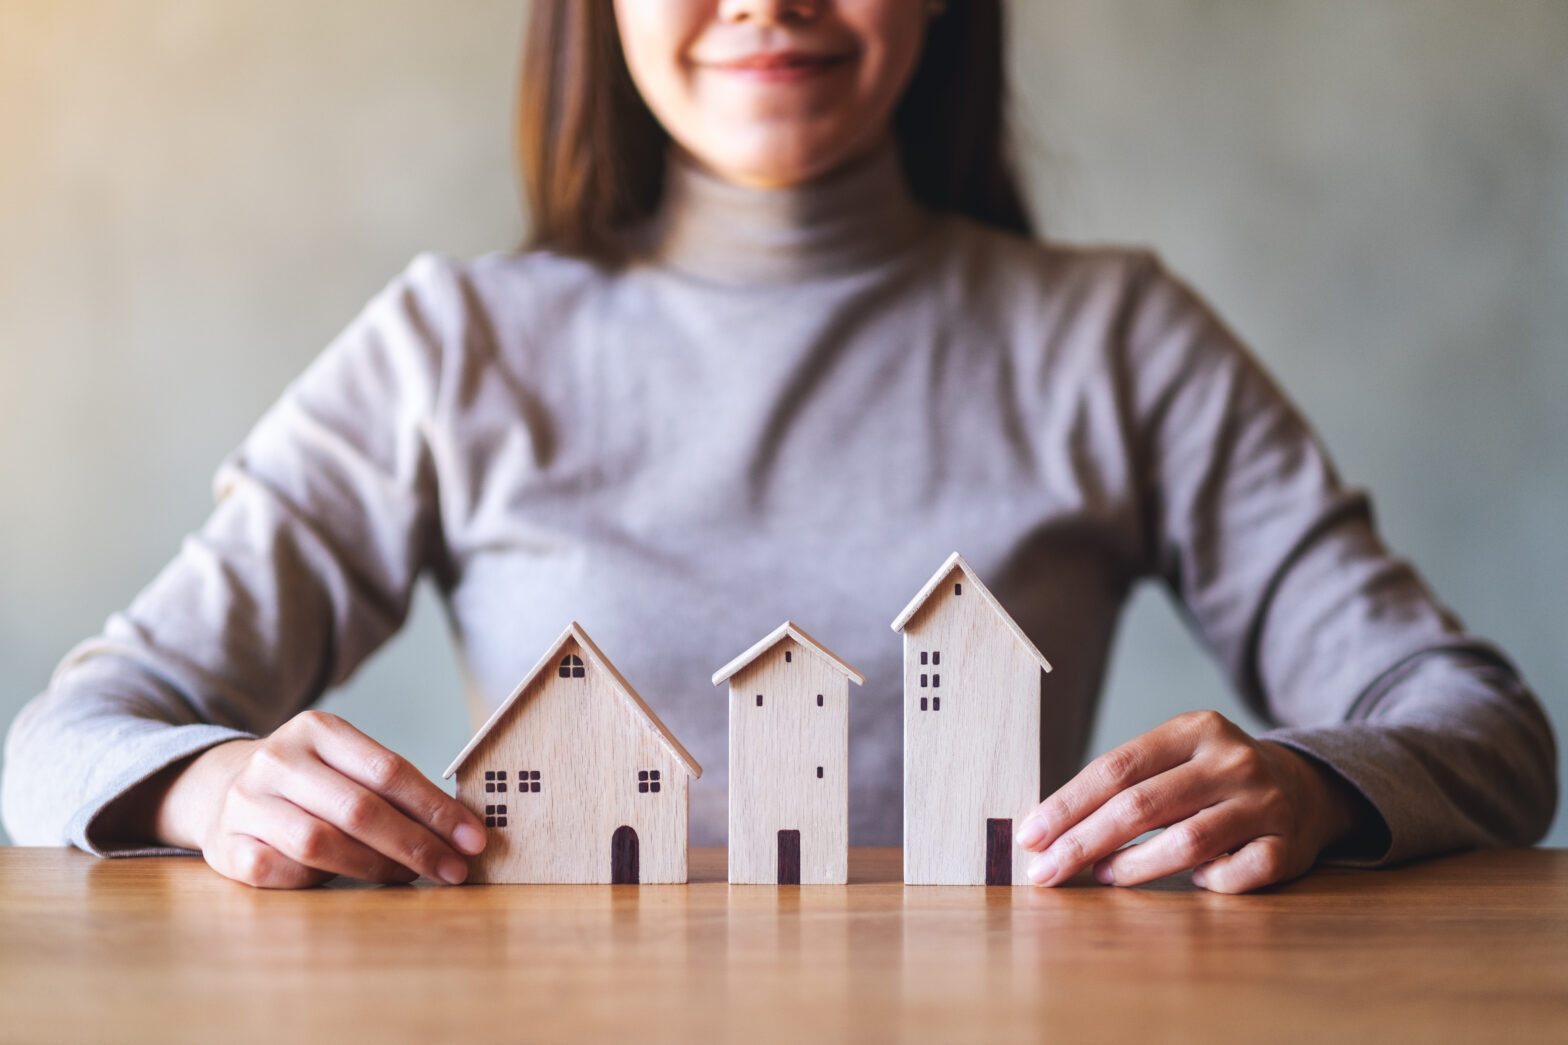 Property manager - Closeup image of a woman holding wooden house models on the table